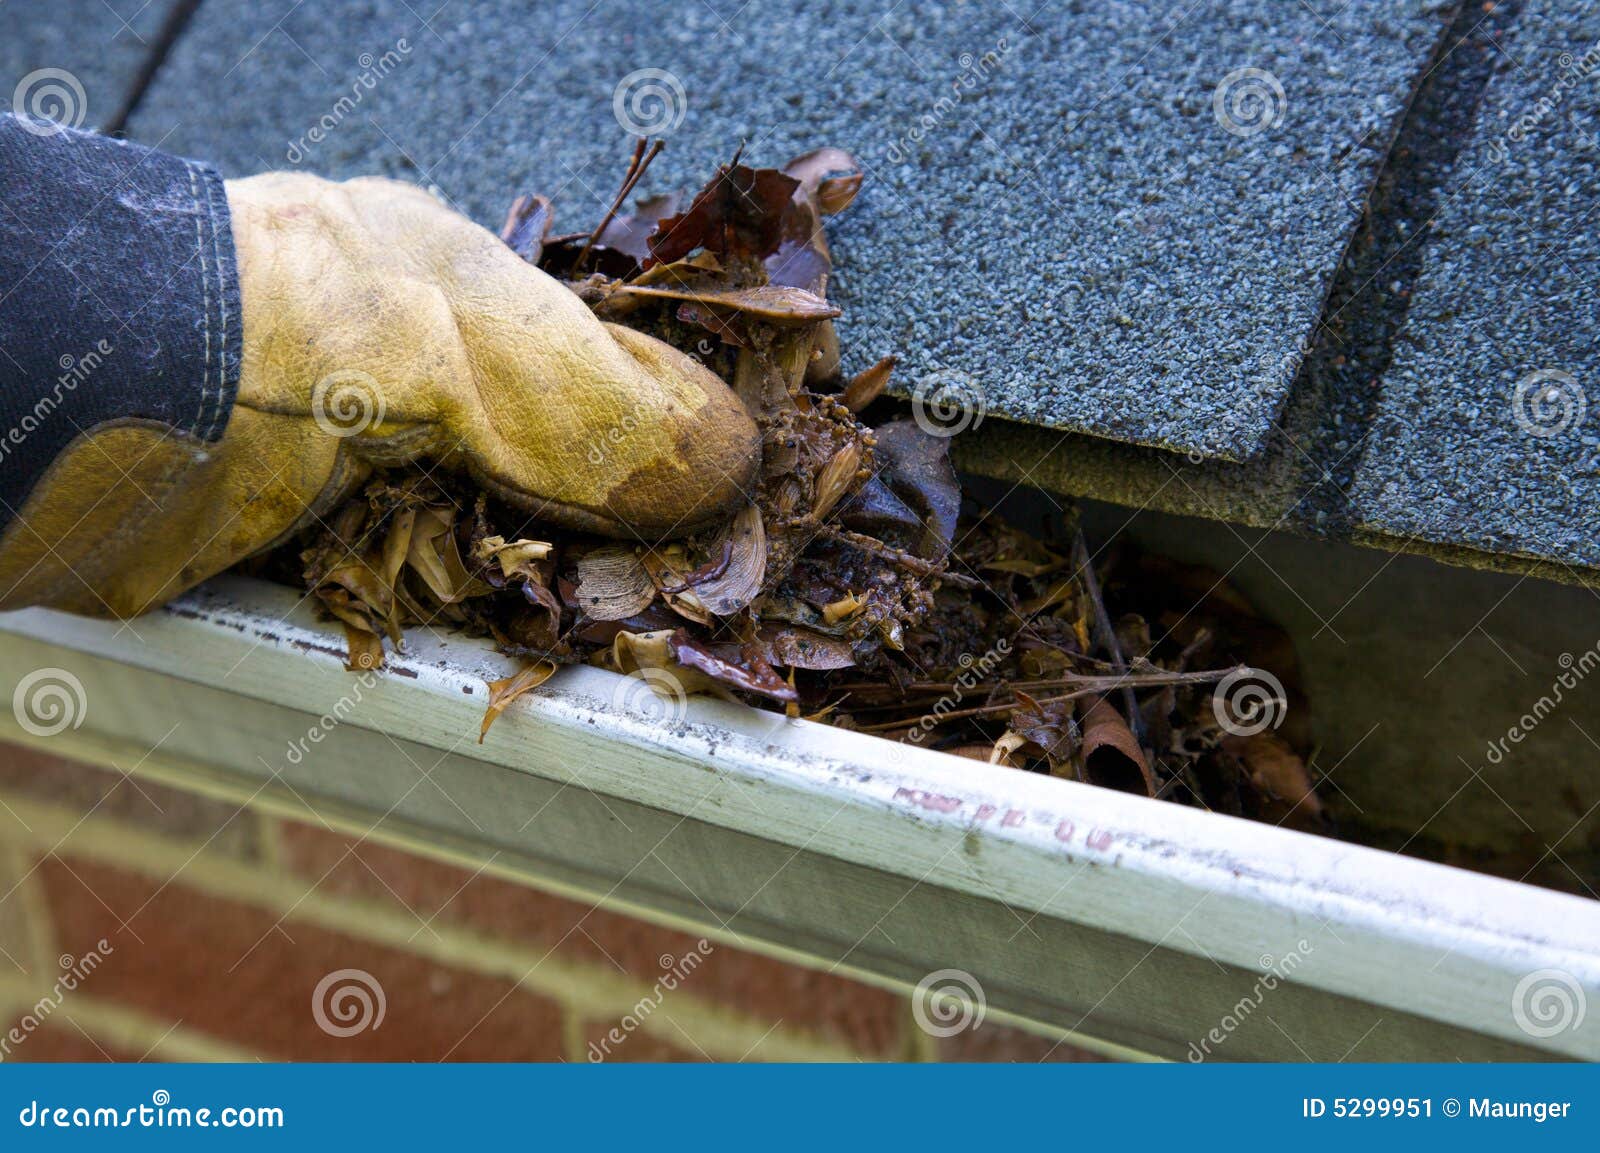 fall cleanup - leaves in gutter